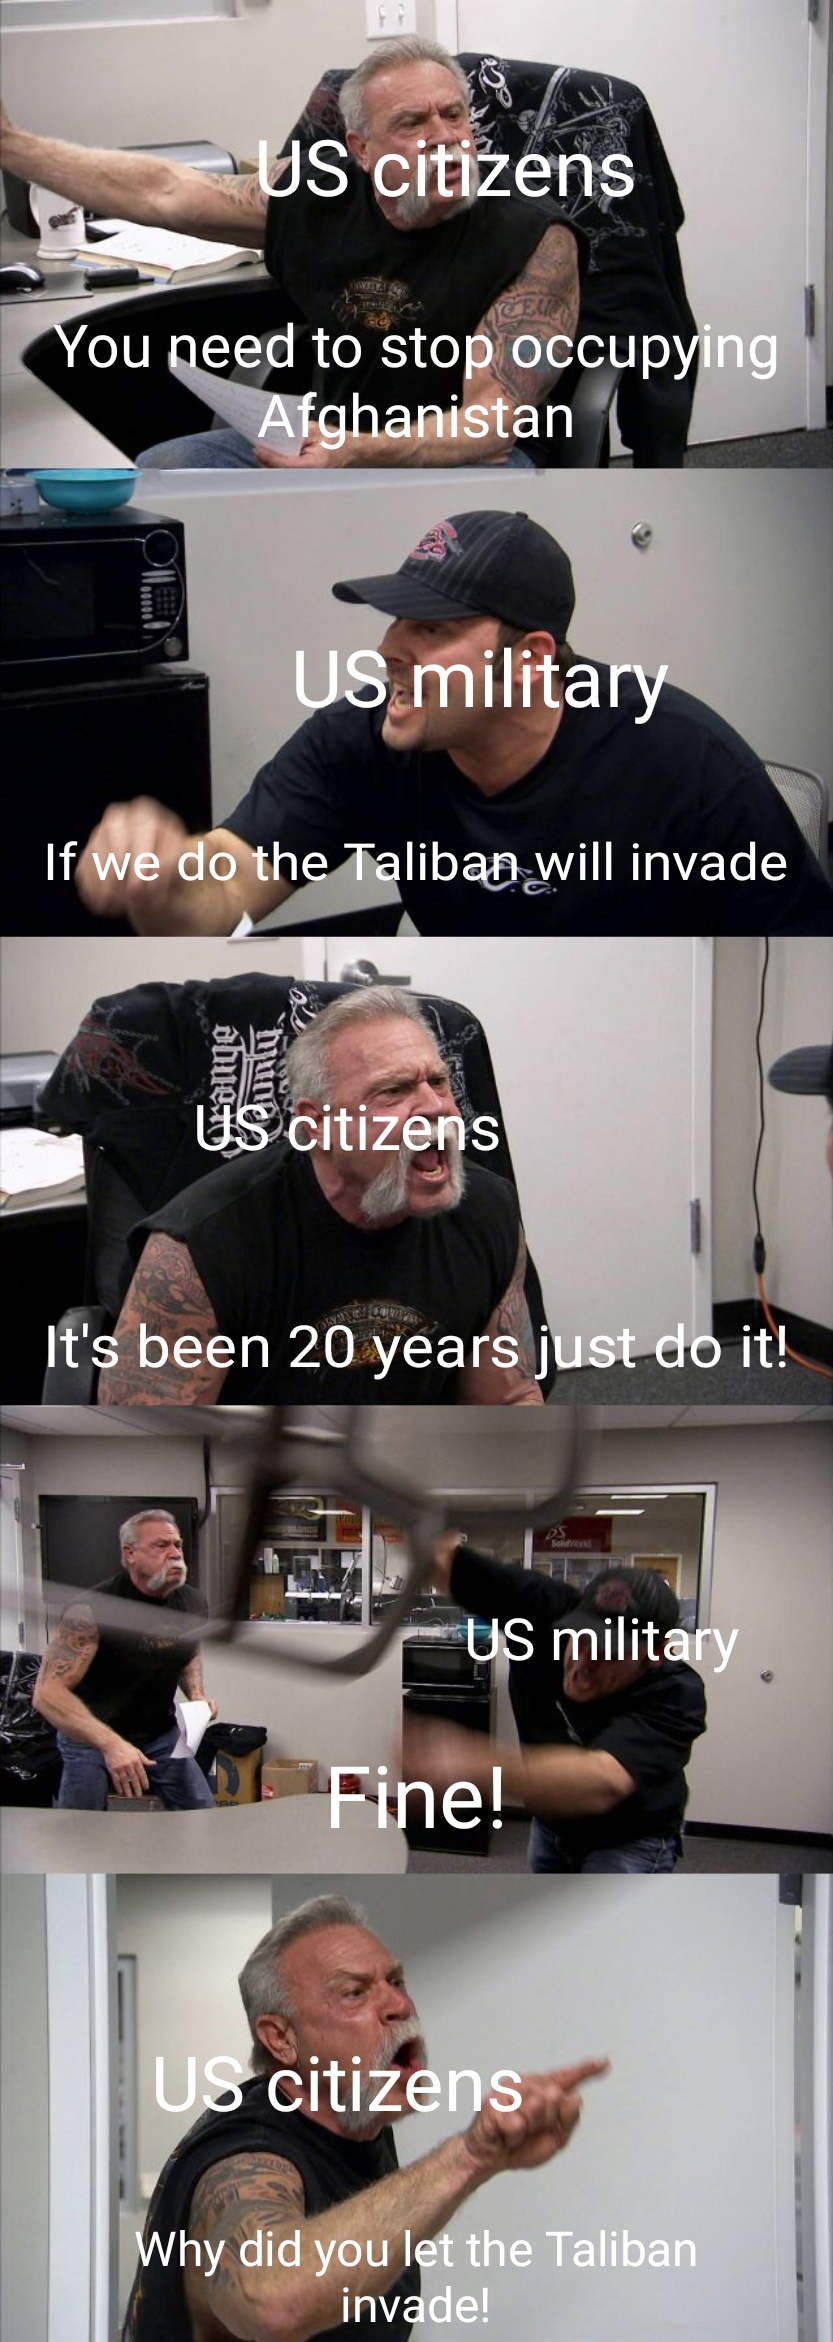 american chopper meme bagging area - Us citizens You need to stop occupying Afghanistan Us military if we do the Taliban will invade Us citizens It's been 20 years just do it! us military Fine! us citizens Why did you let the Taliban invade!